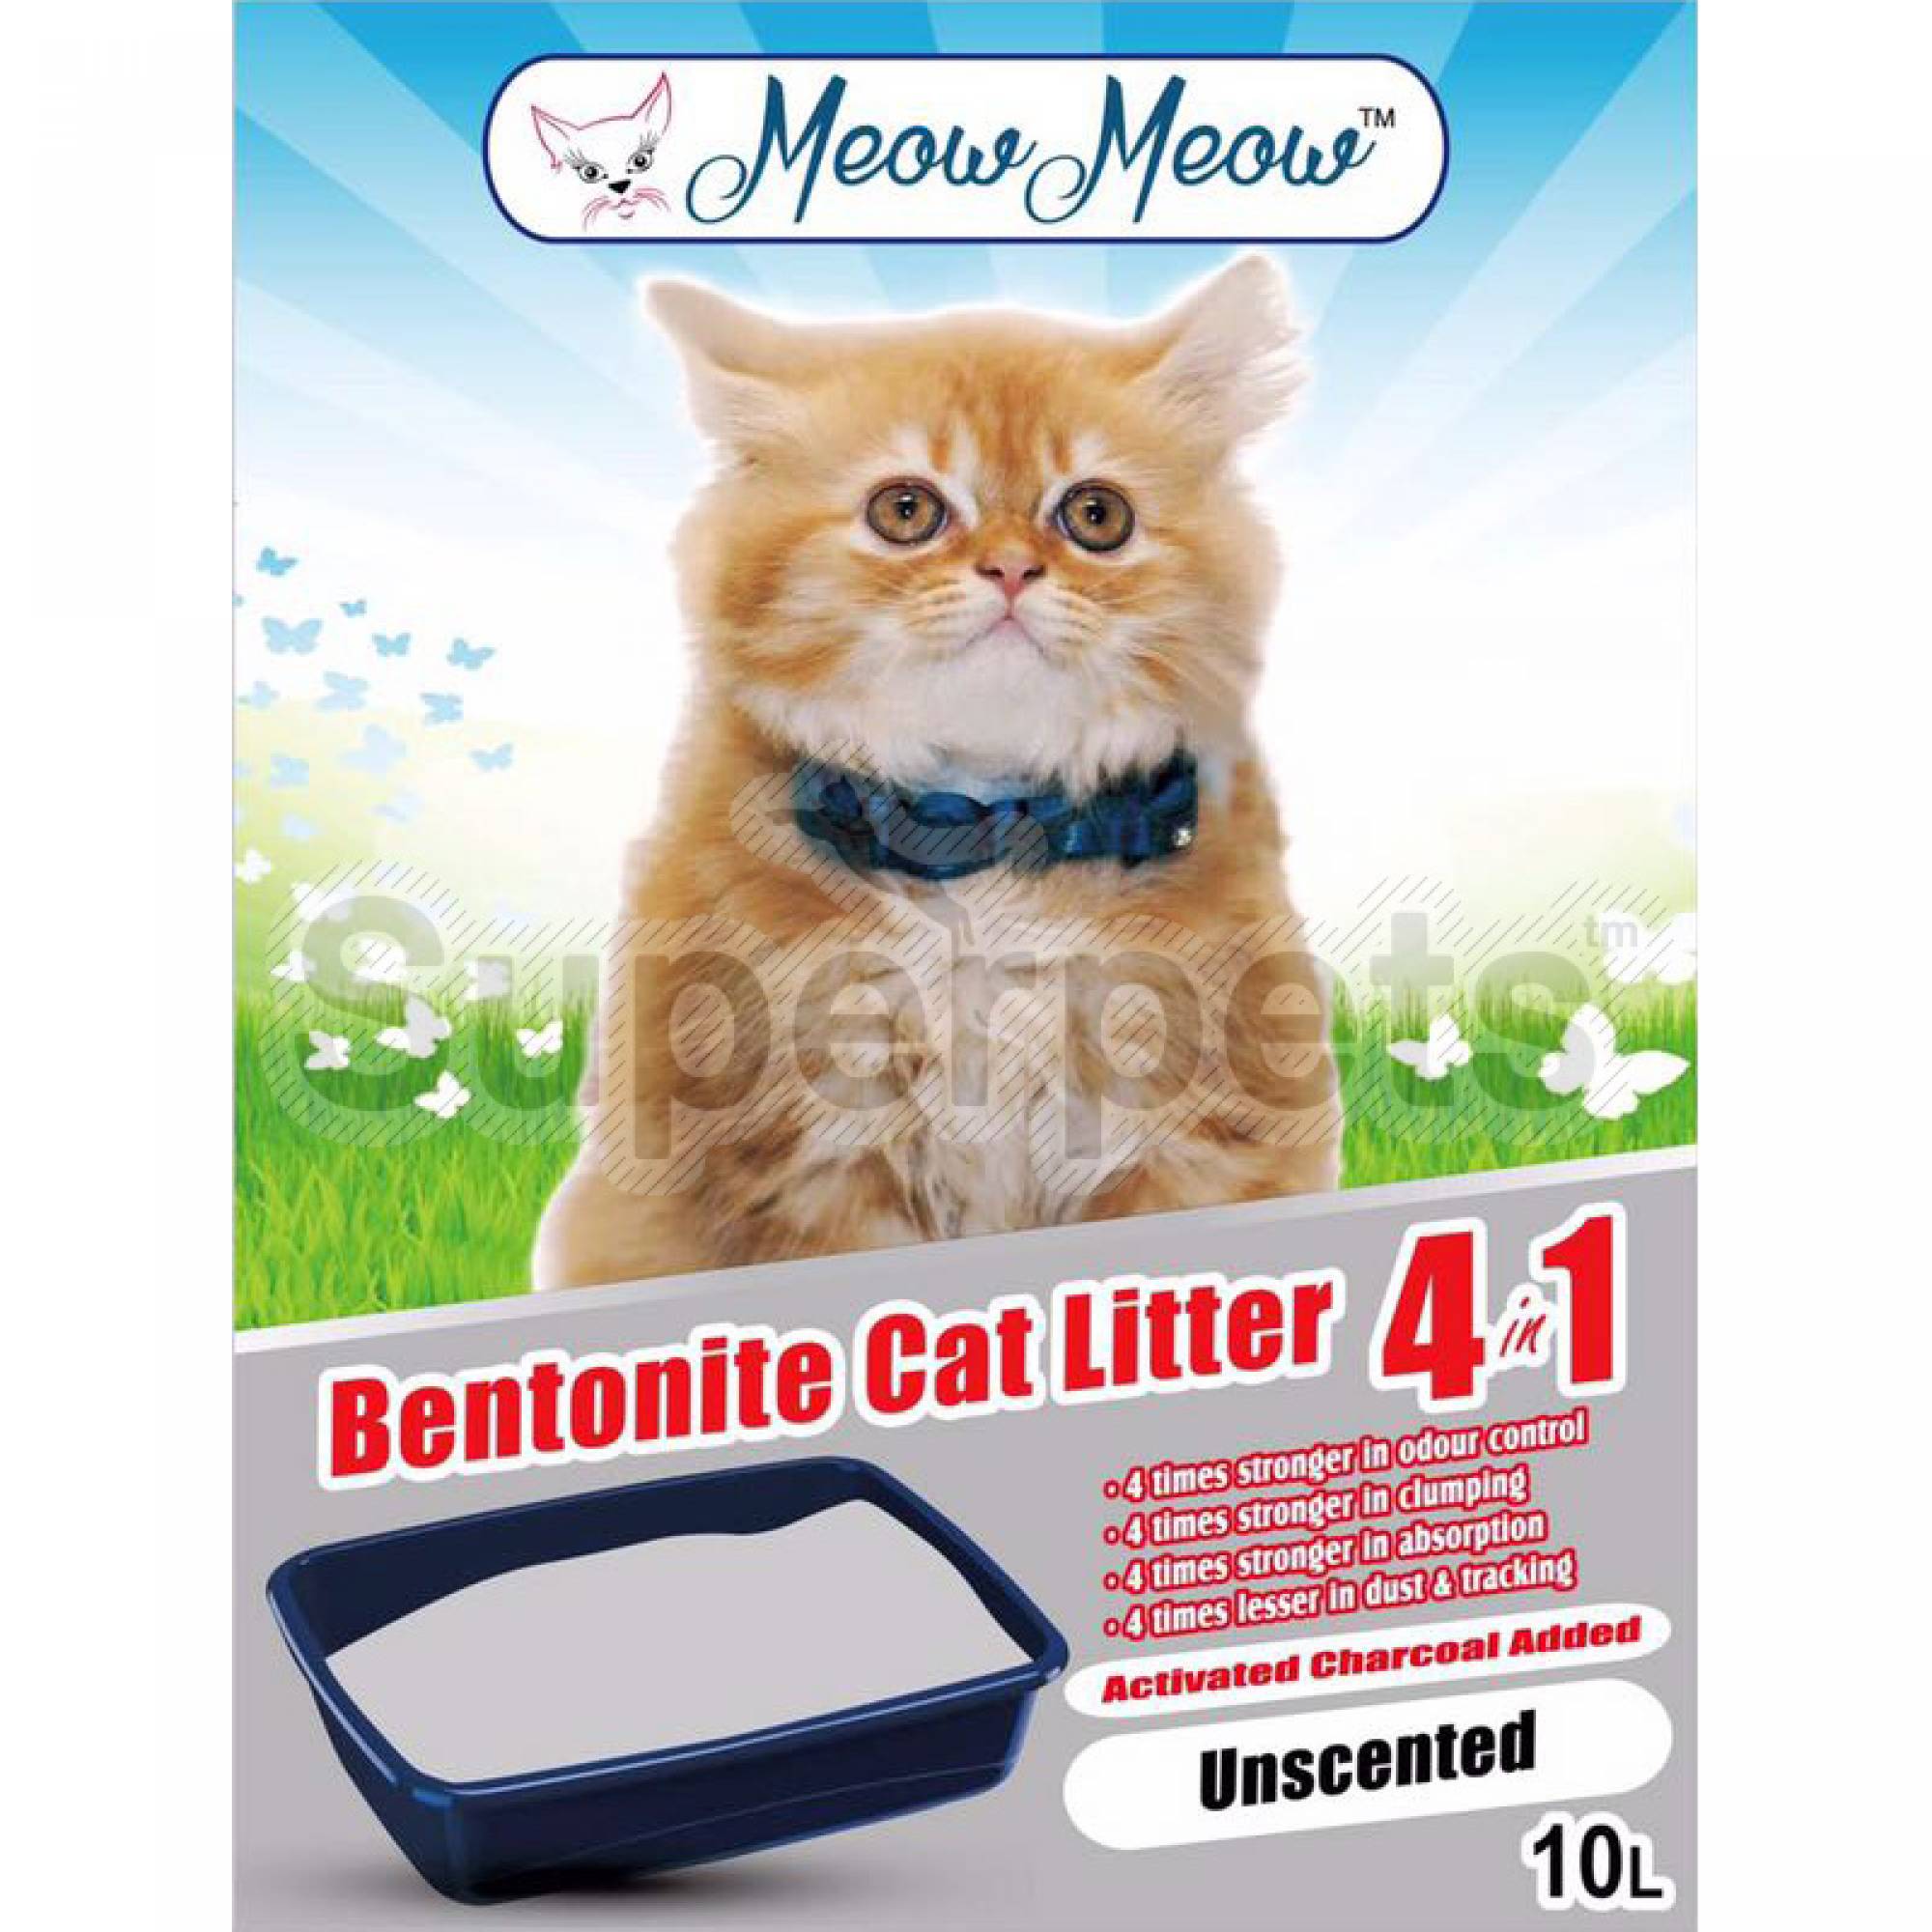 Meow Meow - Bentonite Cat litter 4-in-1 - Unscented 10L